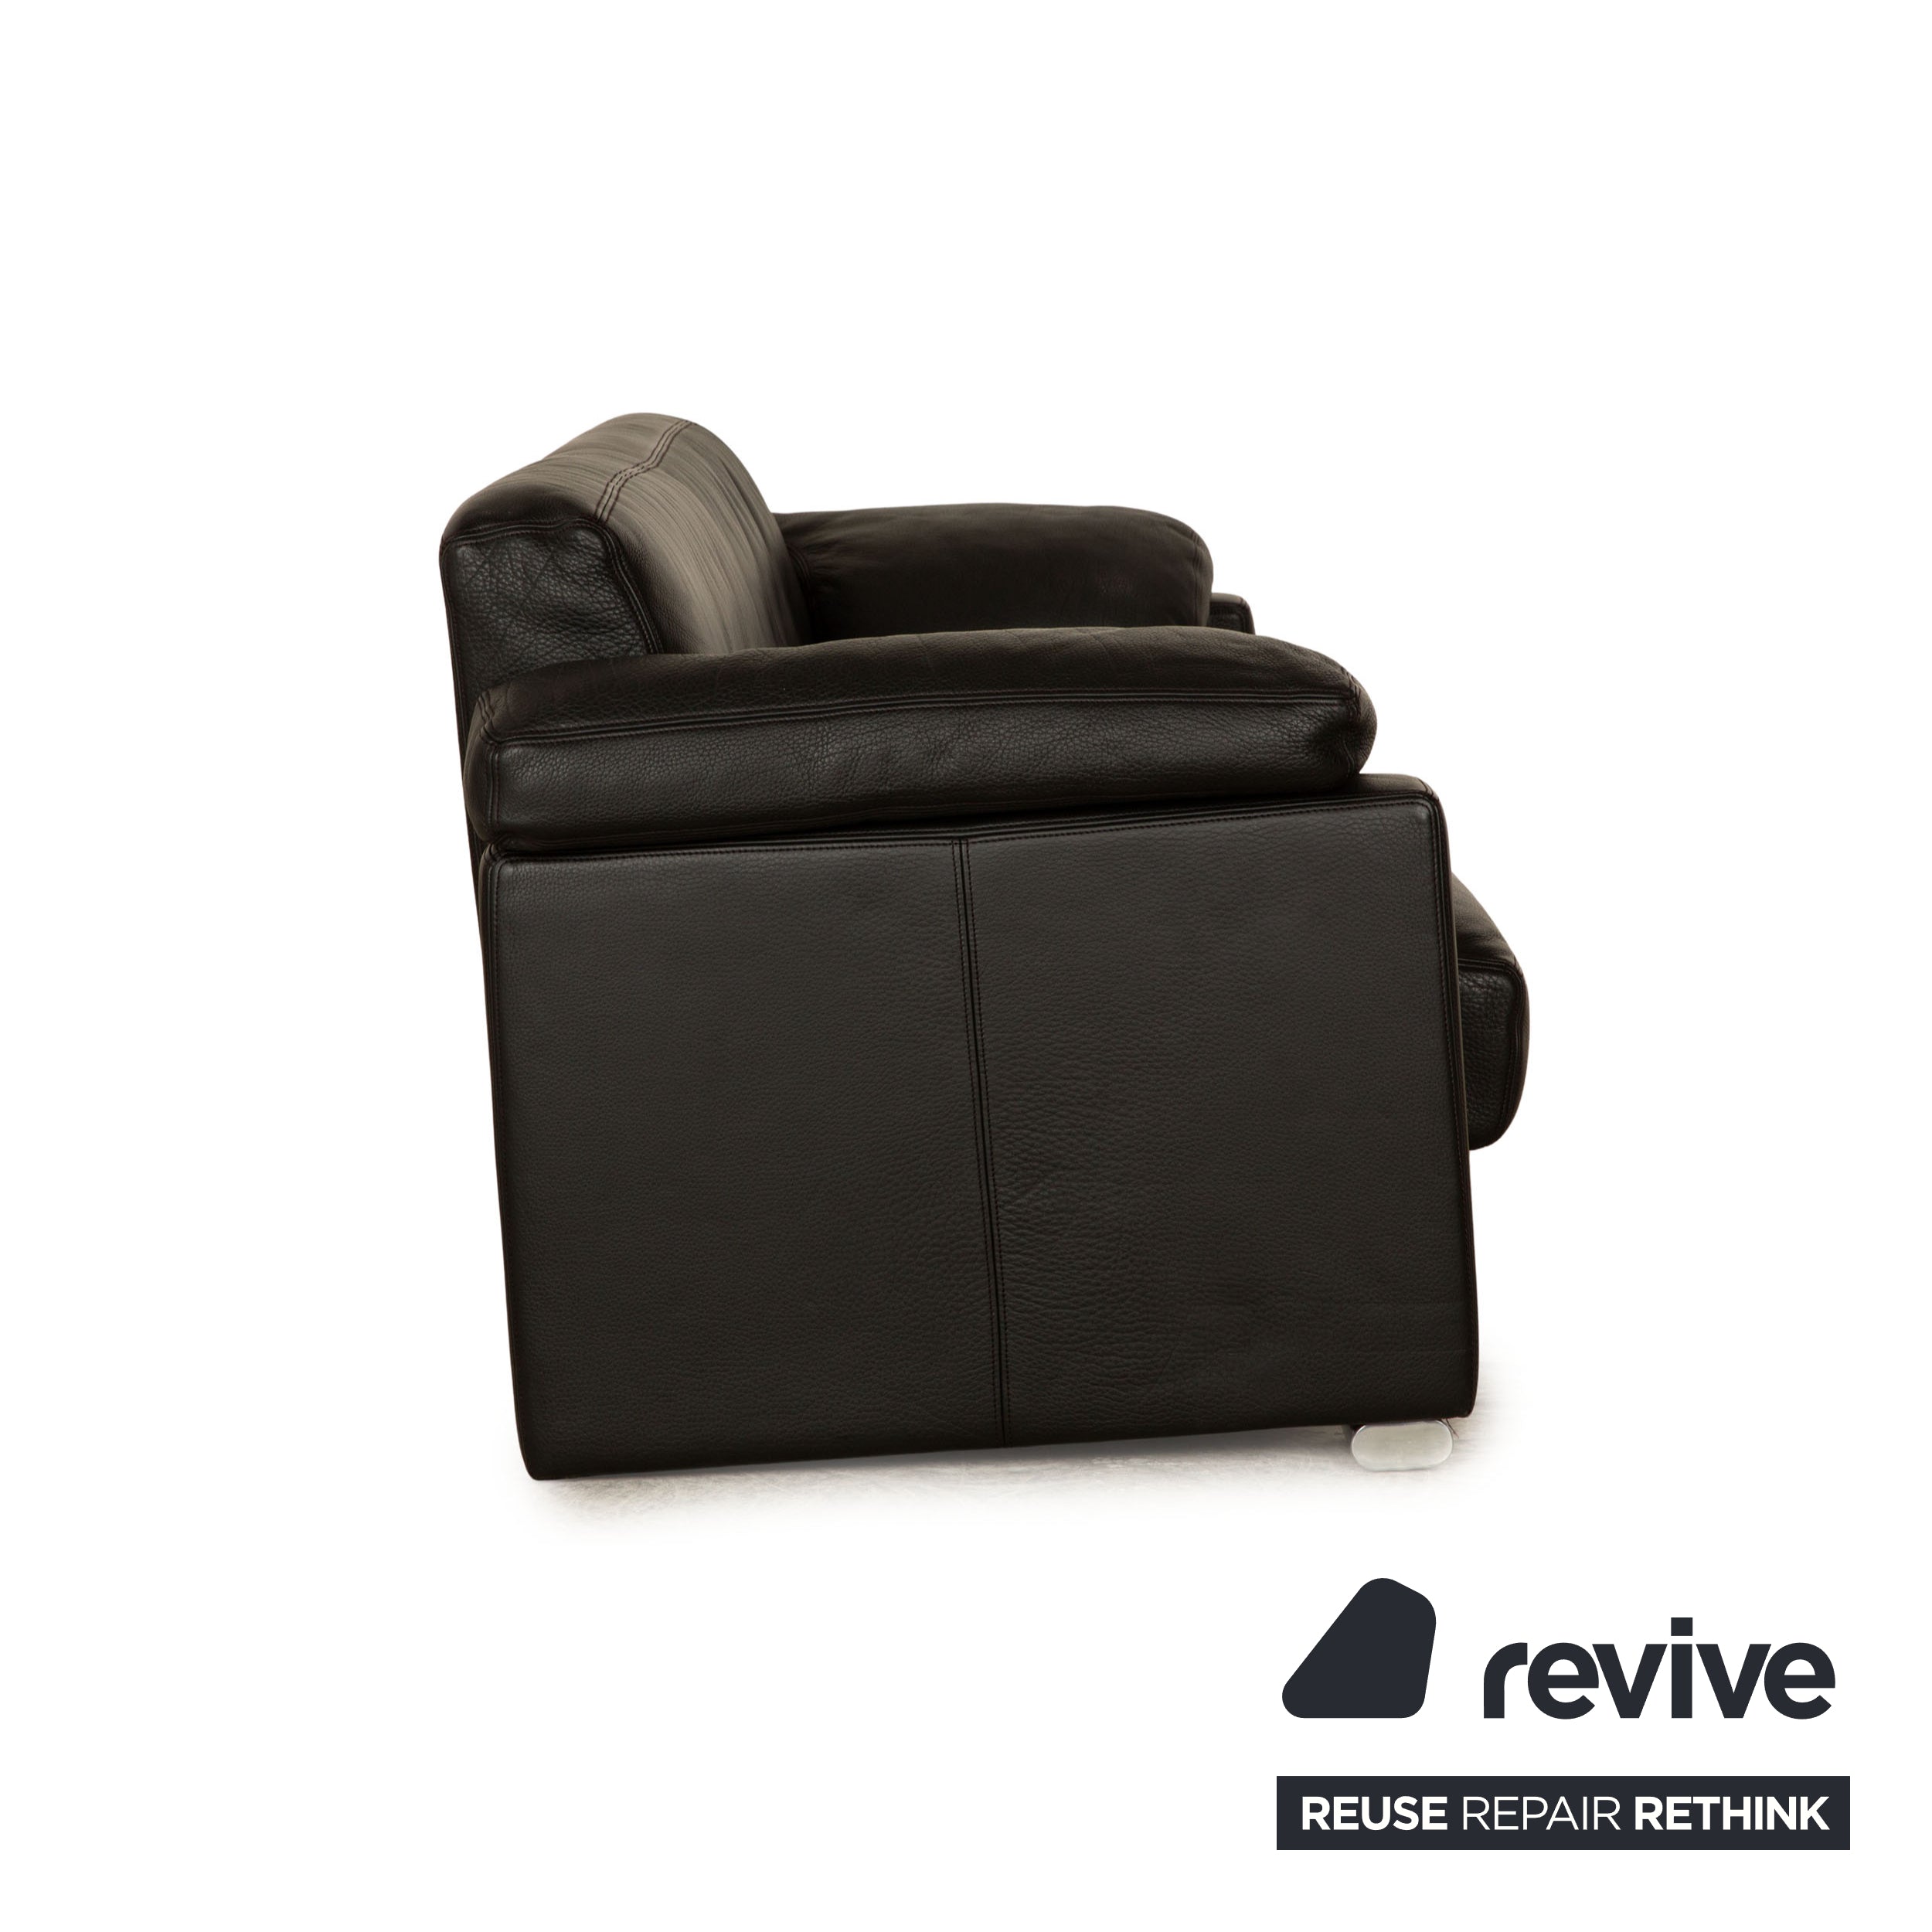 de Sede DS 17 leather three-seater black sofa couch